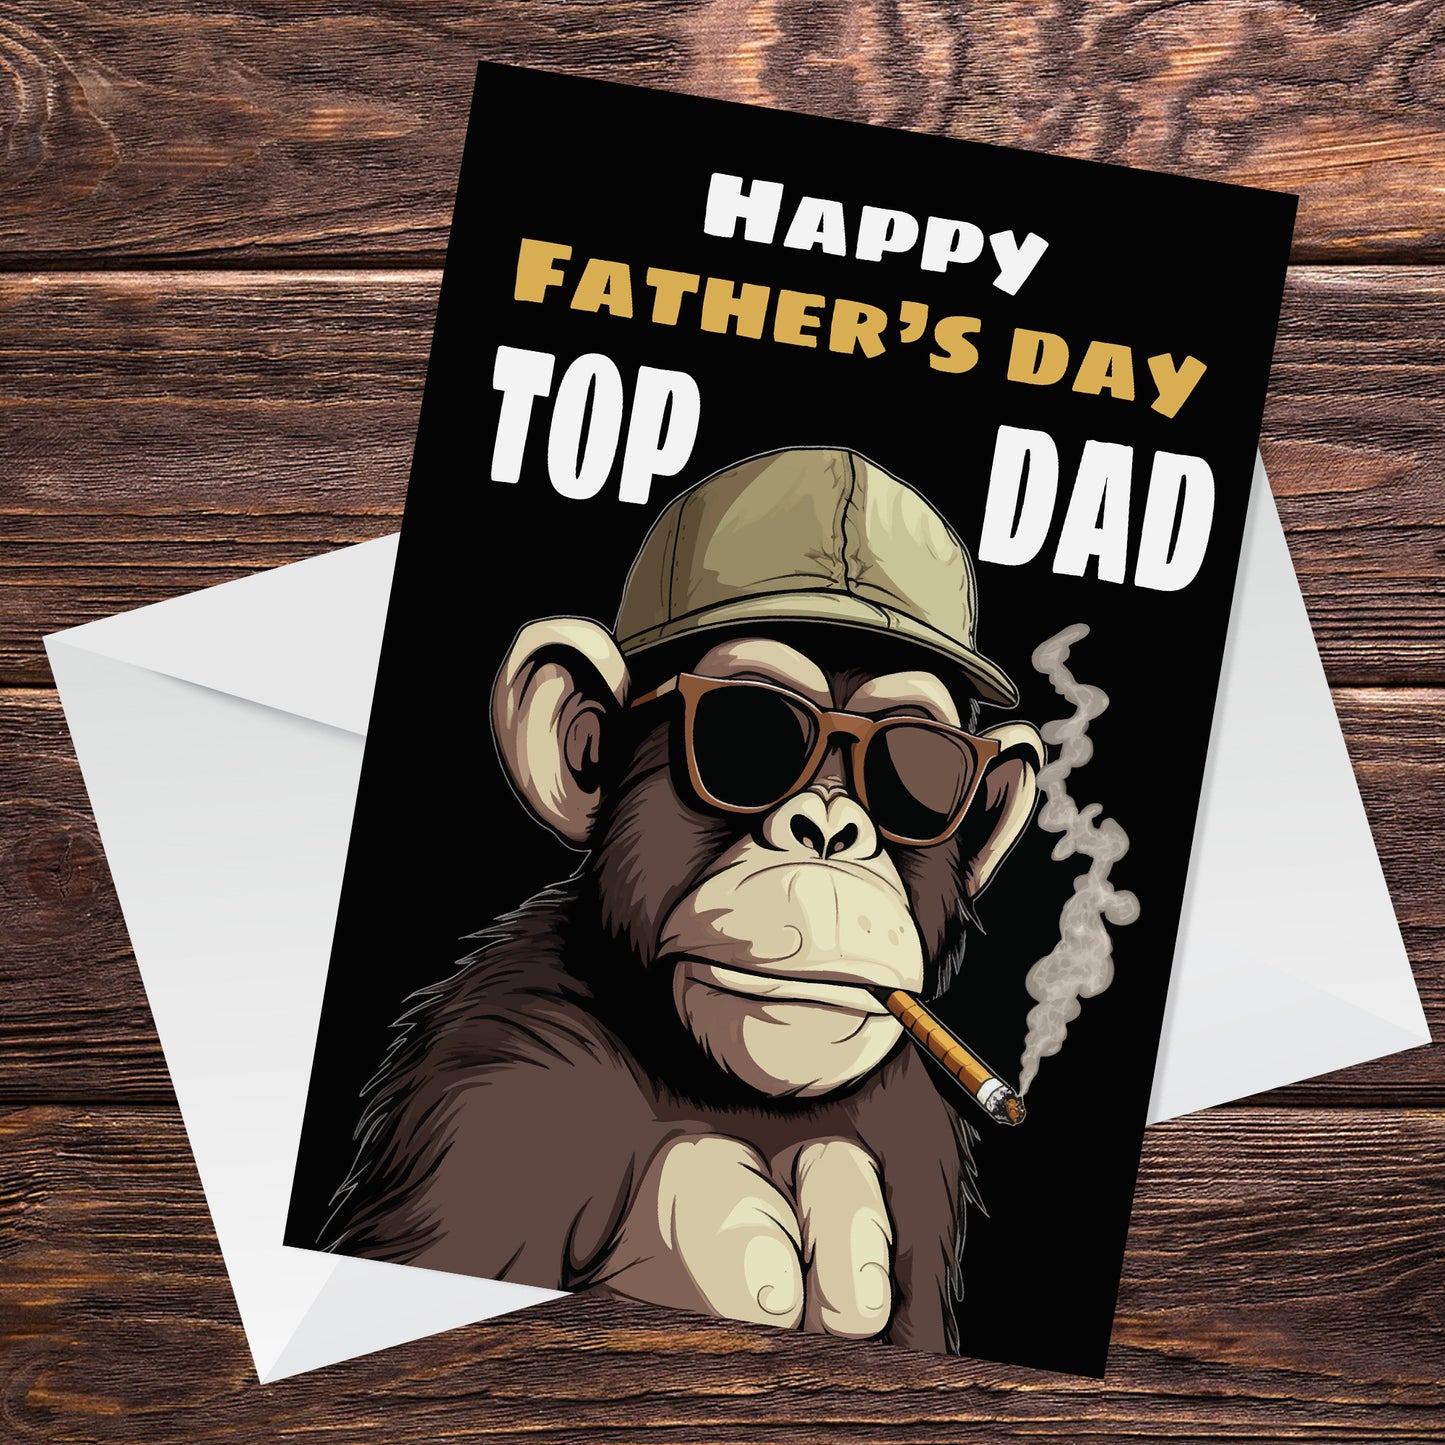 Top Dad Fathers Day Card Funny Novelty Joke Card For Dad